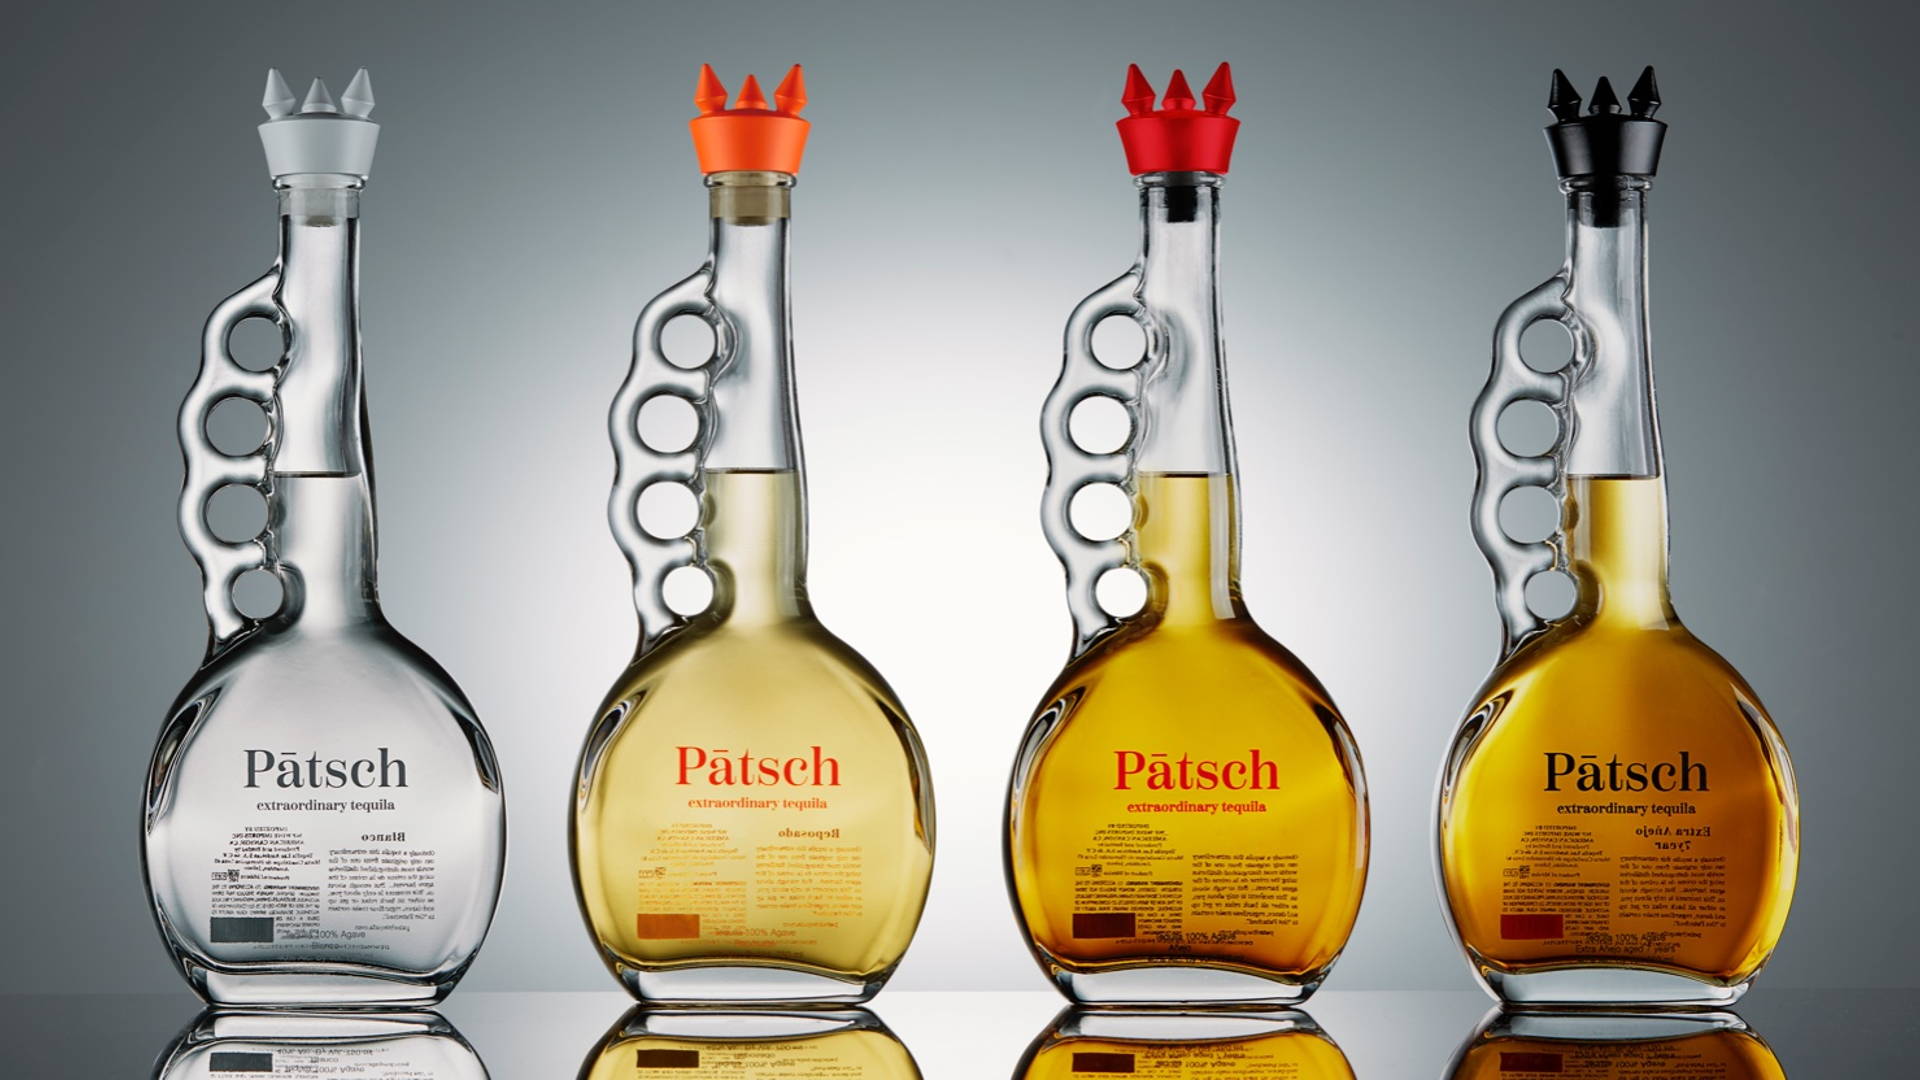 Featured image for Aquatic Architect Martin Schapira Designed a Striking Bottle For Patsch Tequila